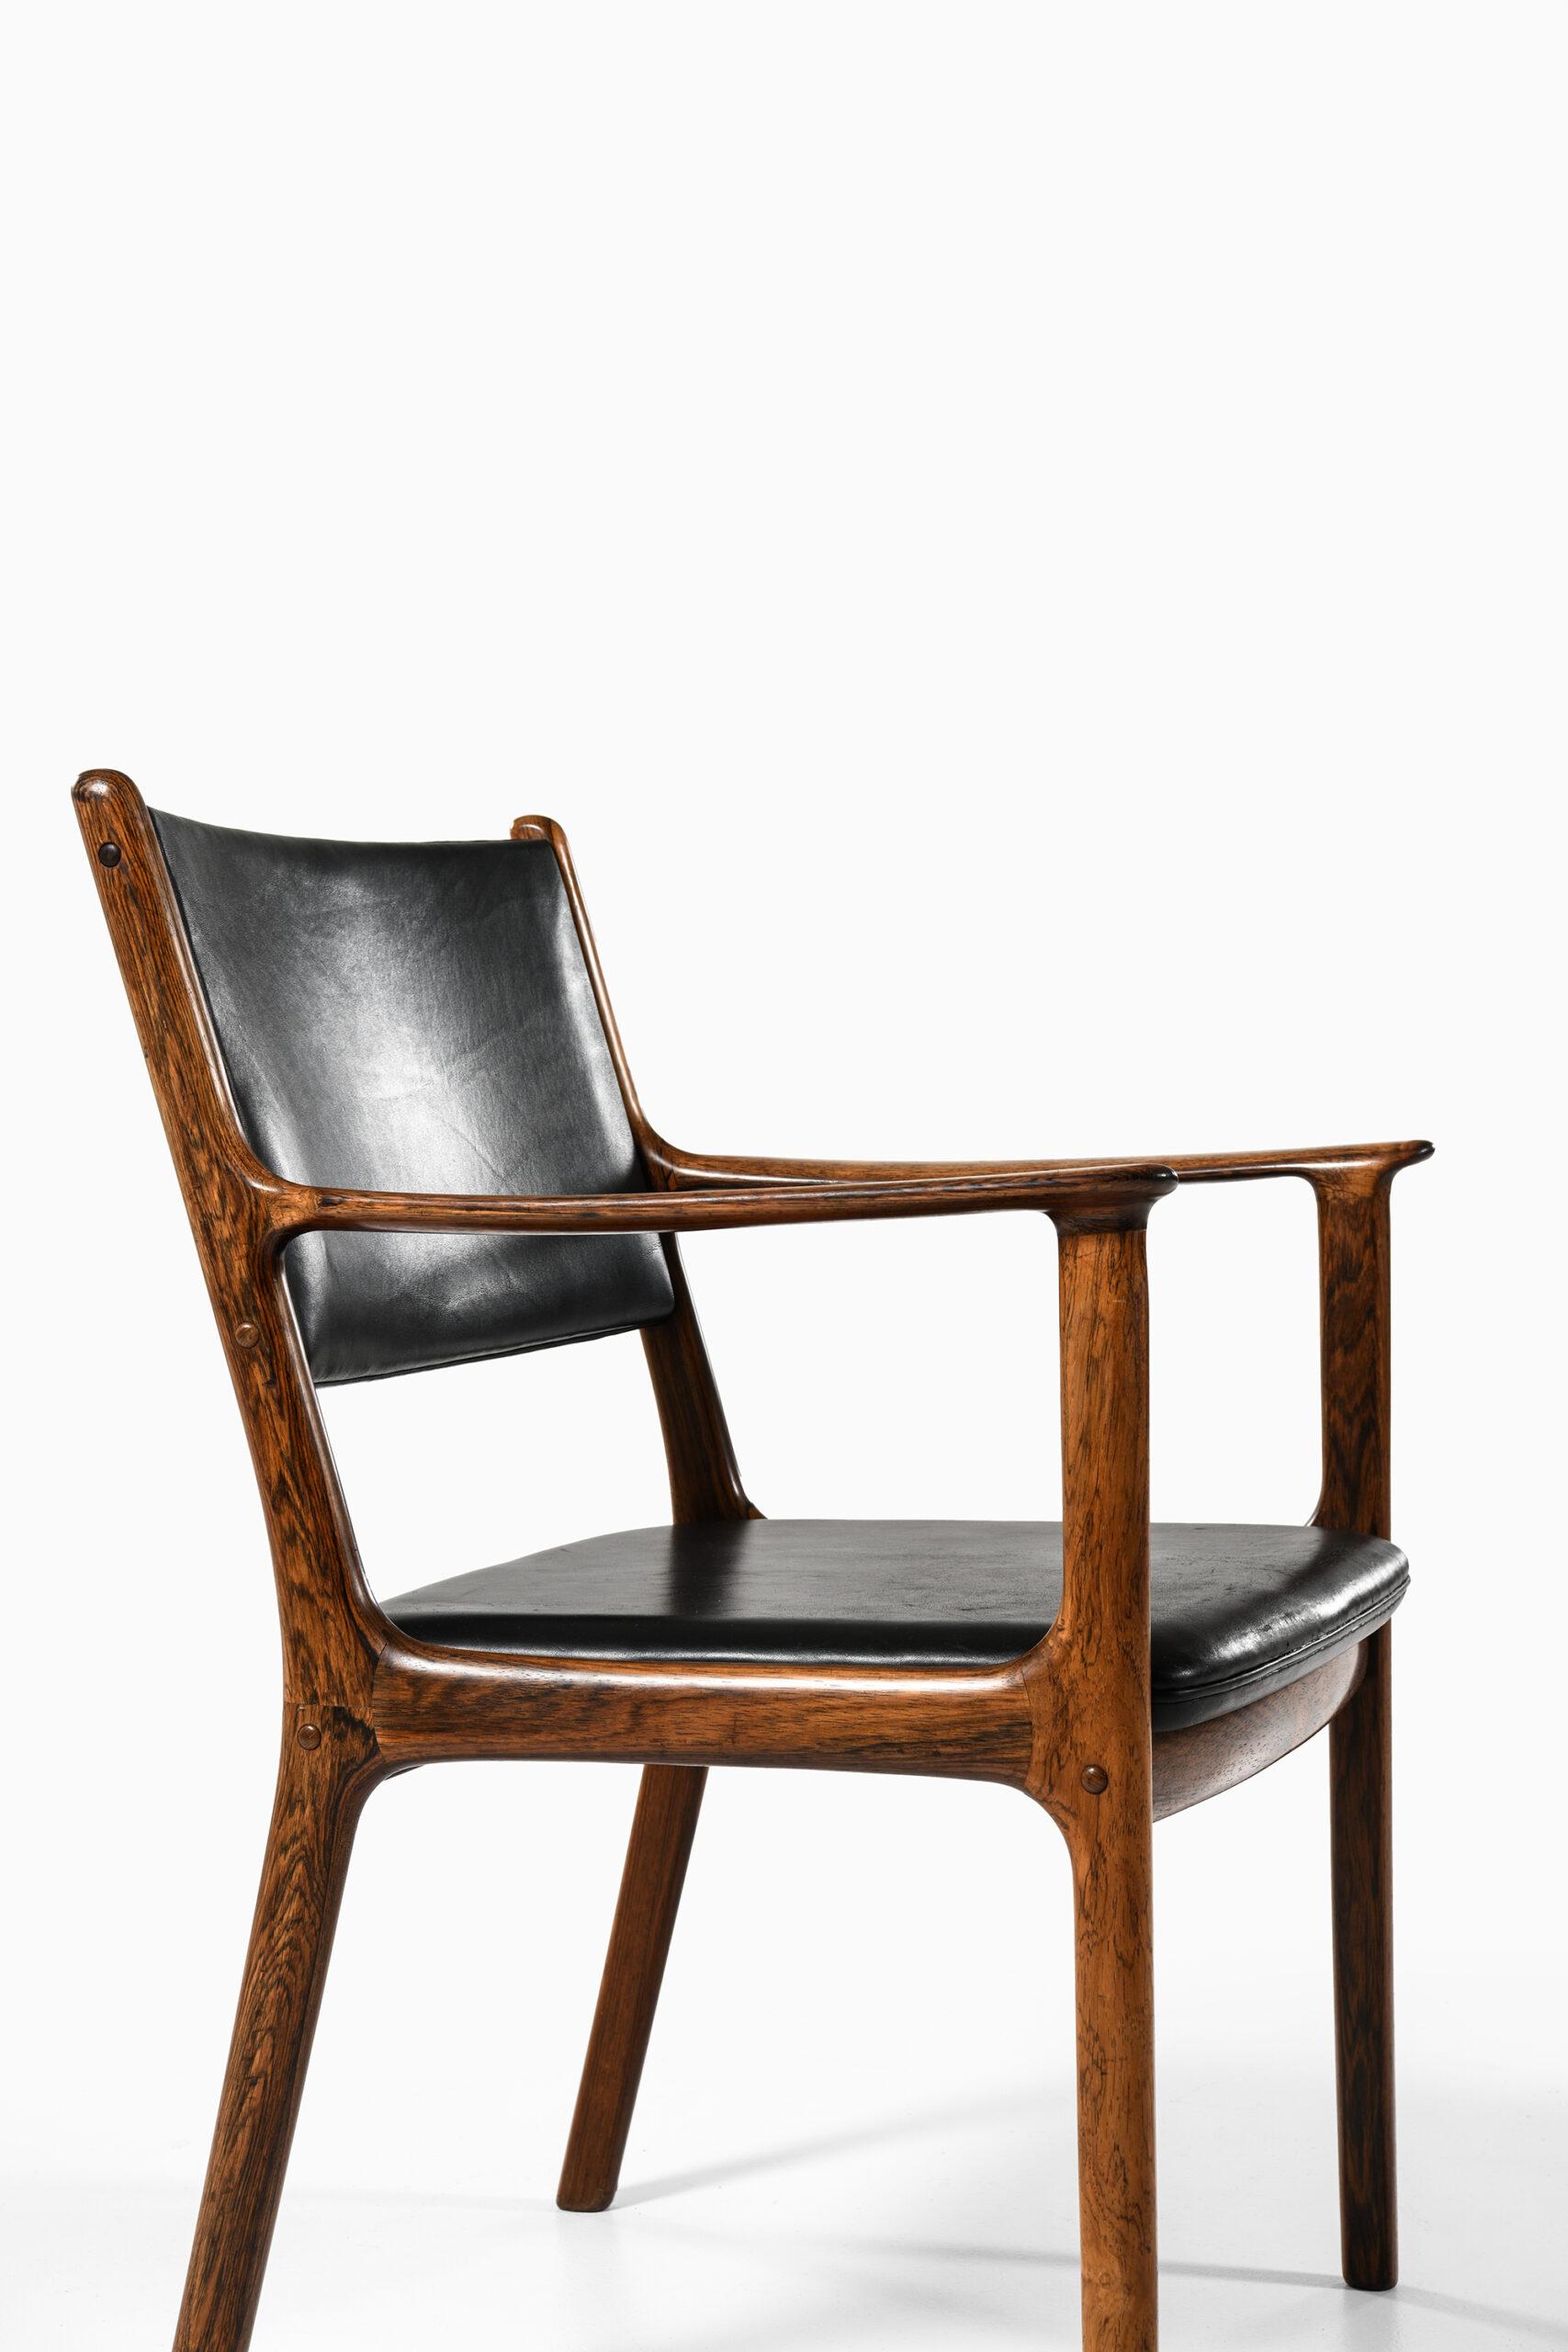 Mid-20th Century Ole Wanscher Armchairs Model PJ412 Produced by P. Jeppesens Møbelfabrik For Sale